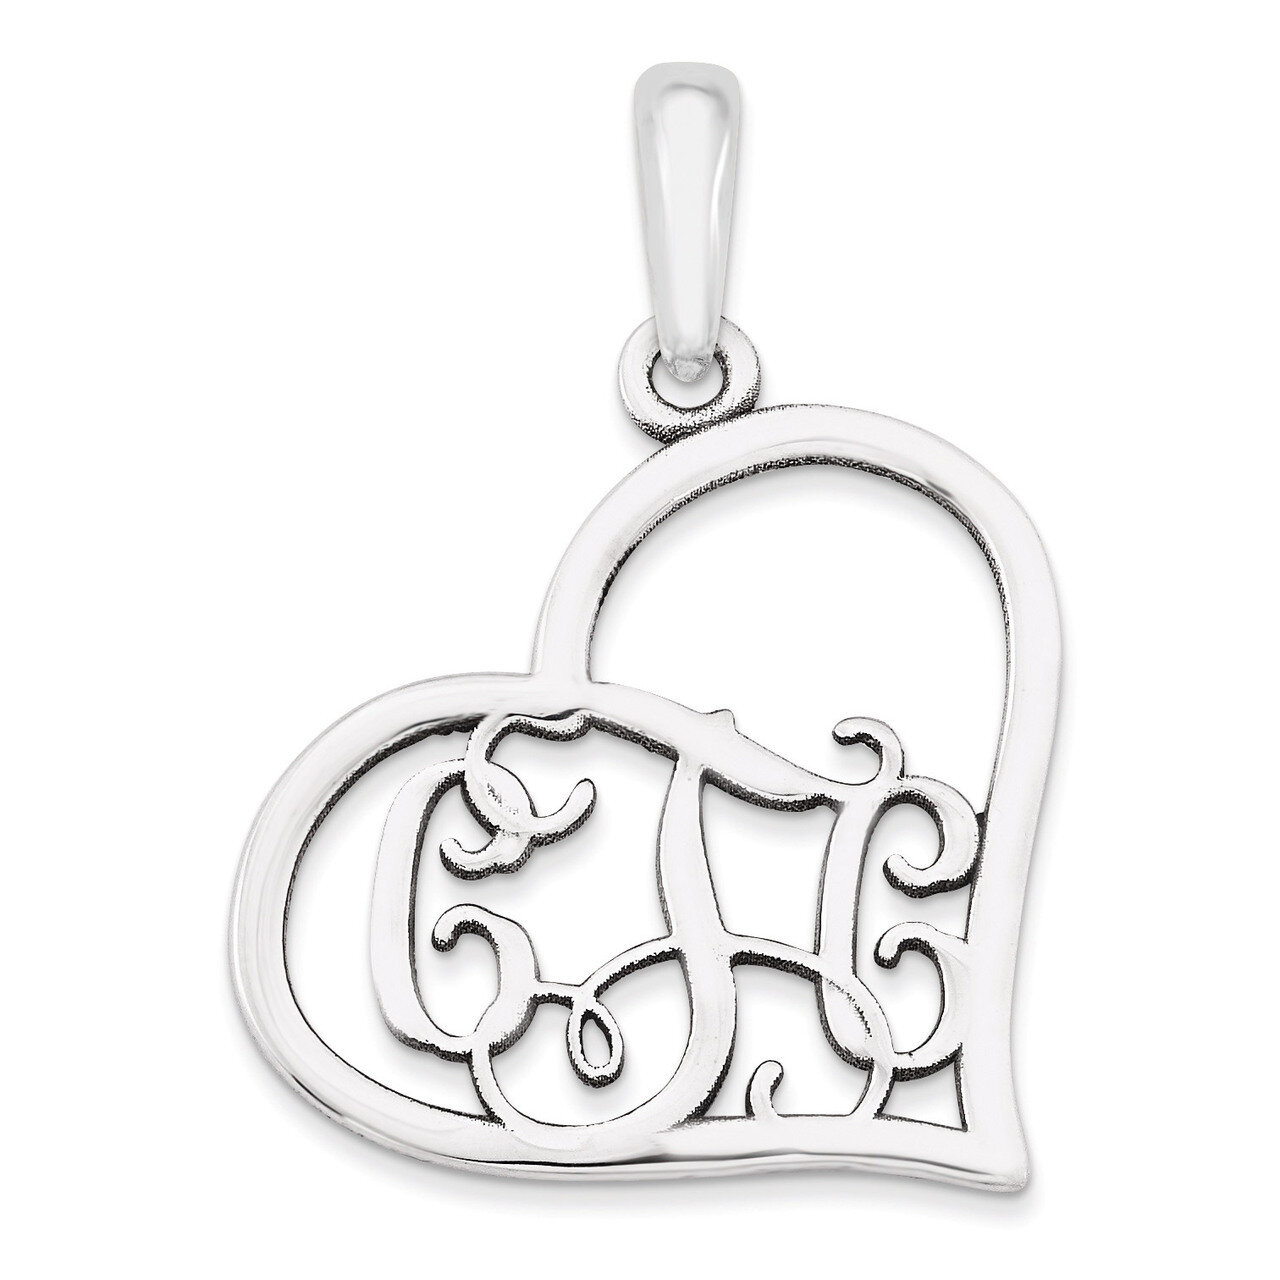 Monogram Heart Pendant Sterling Silver Casted Polished & Satin XNA520SS